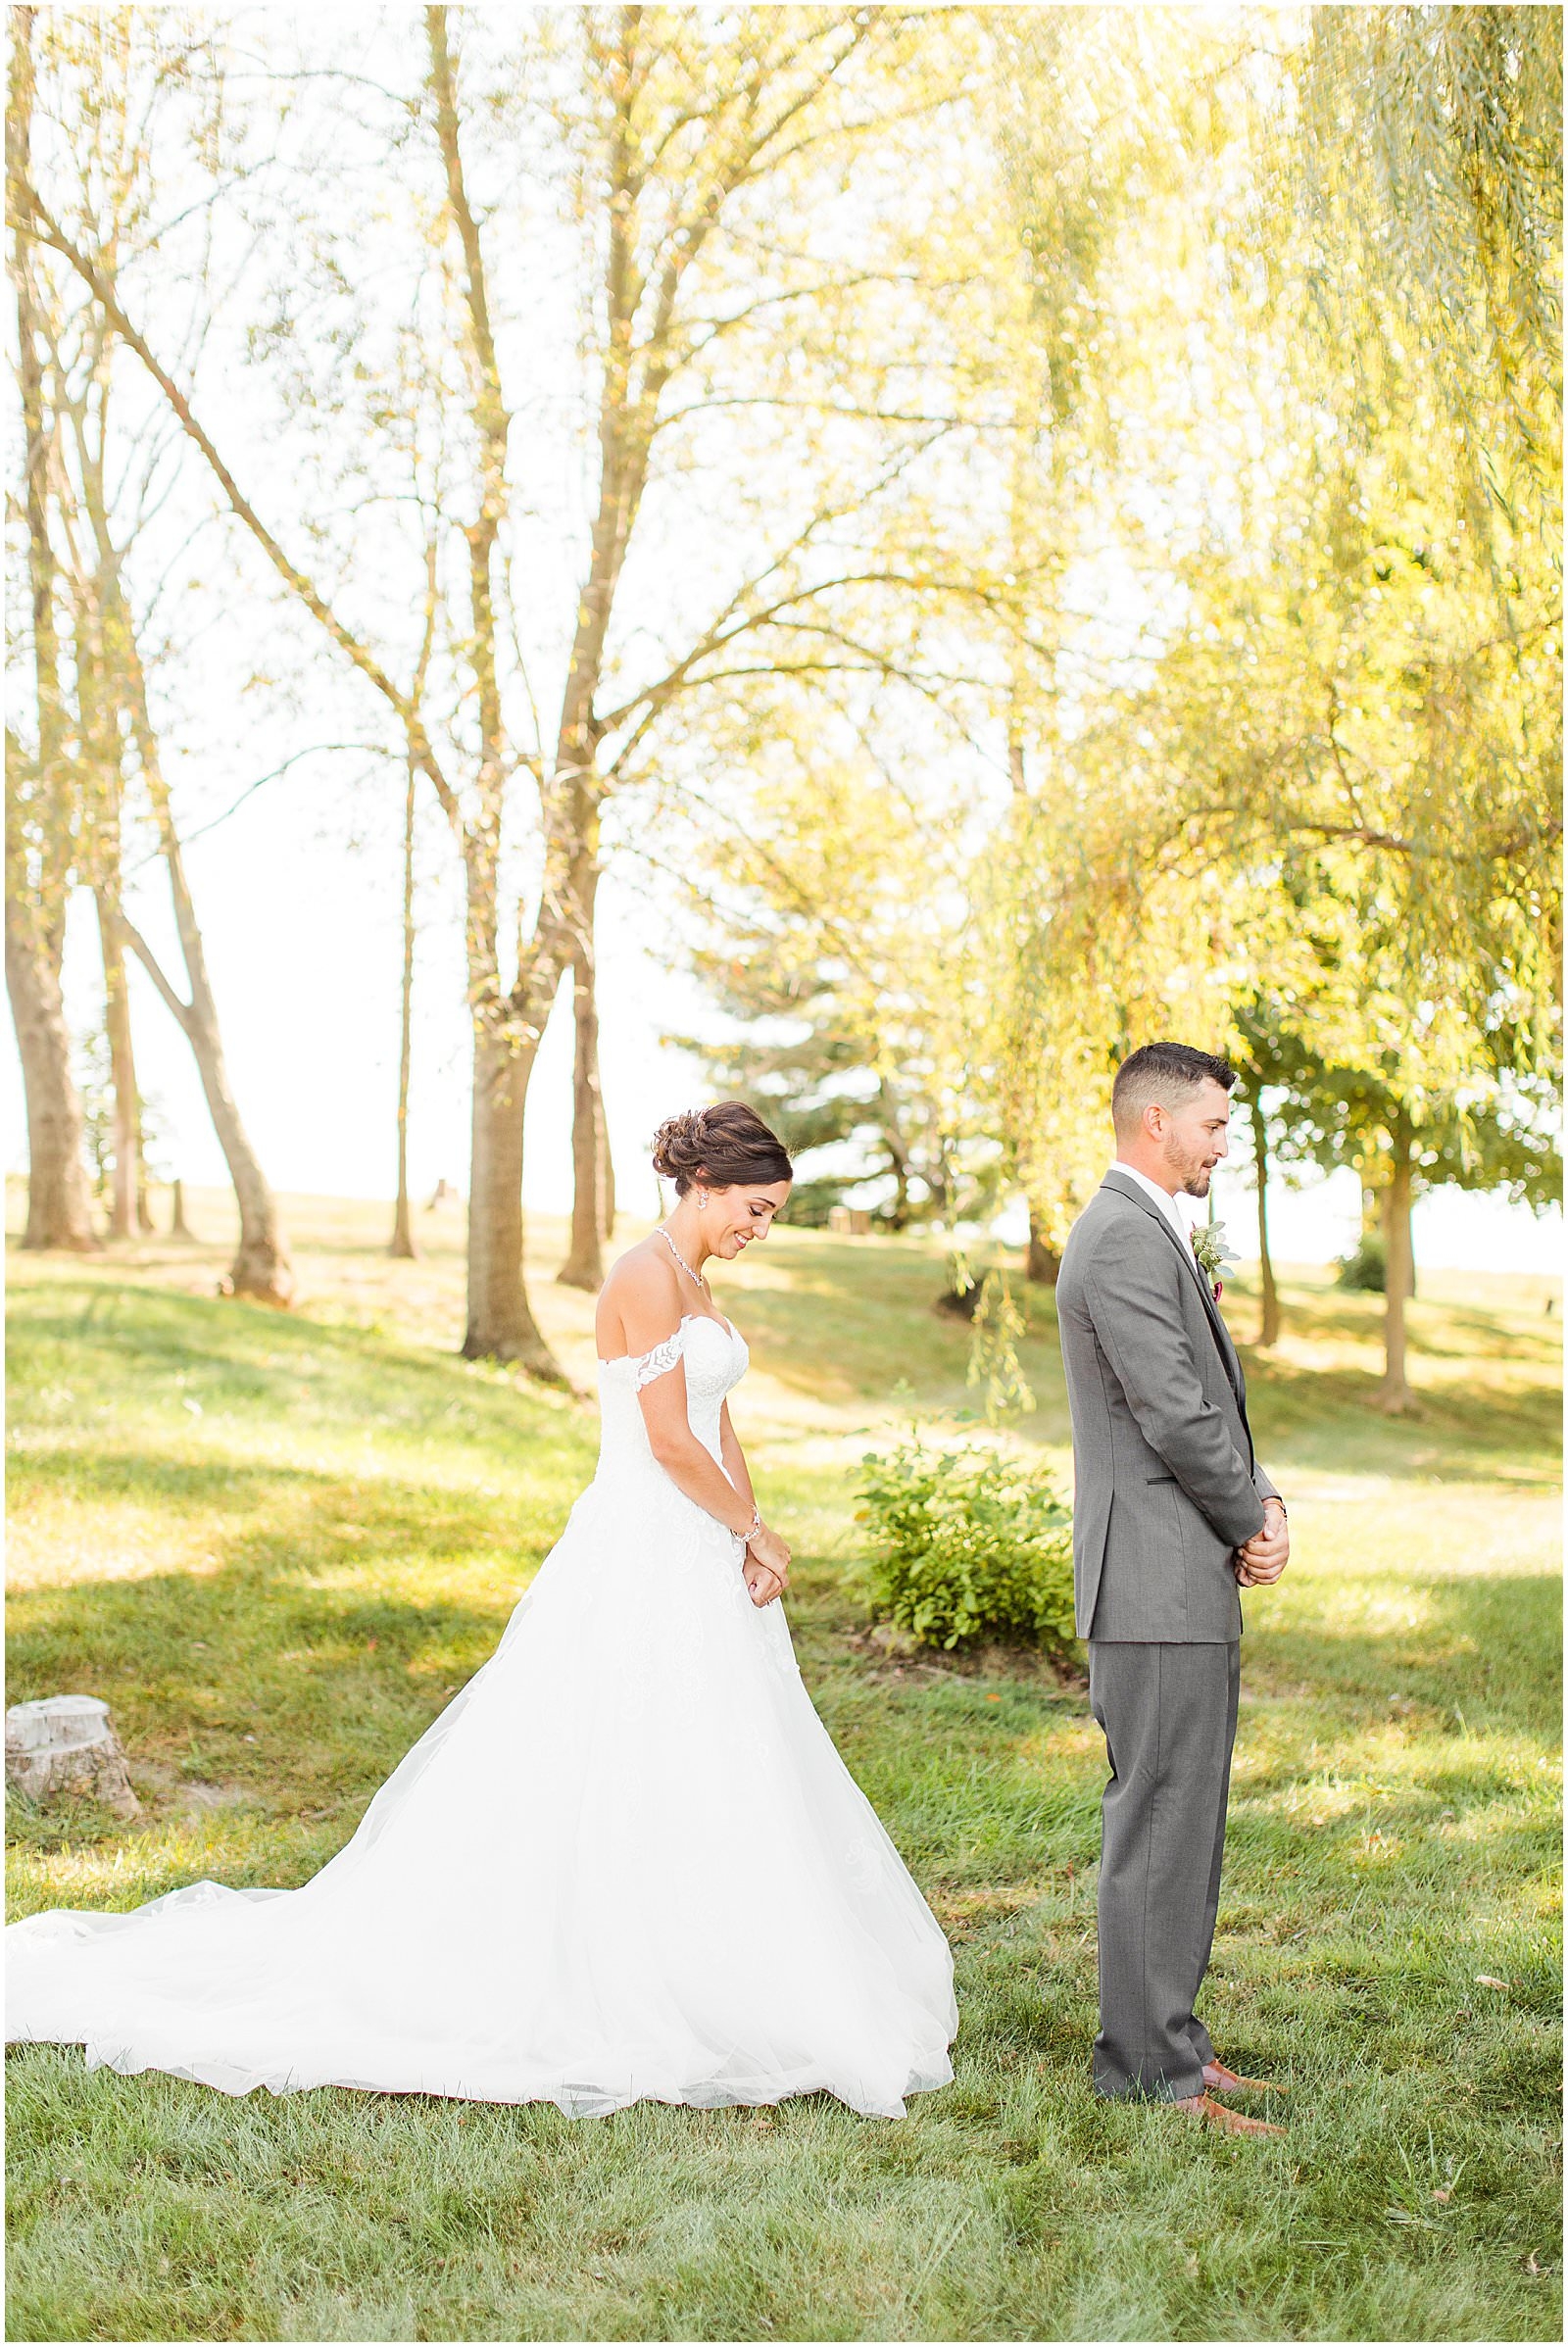 A Stunning Fall Wedding in Indianapolis, IN |. Sally and Andrew | Bret and Brandie Photography 0044.jpg